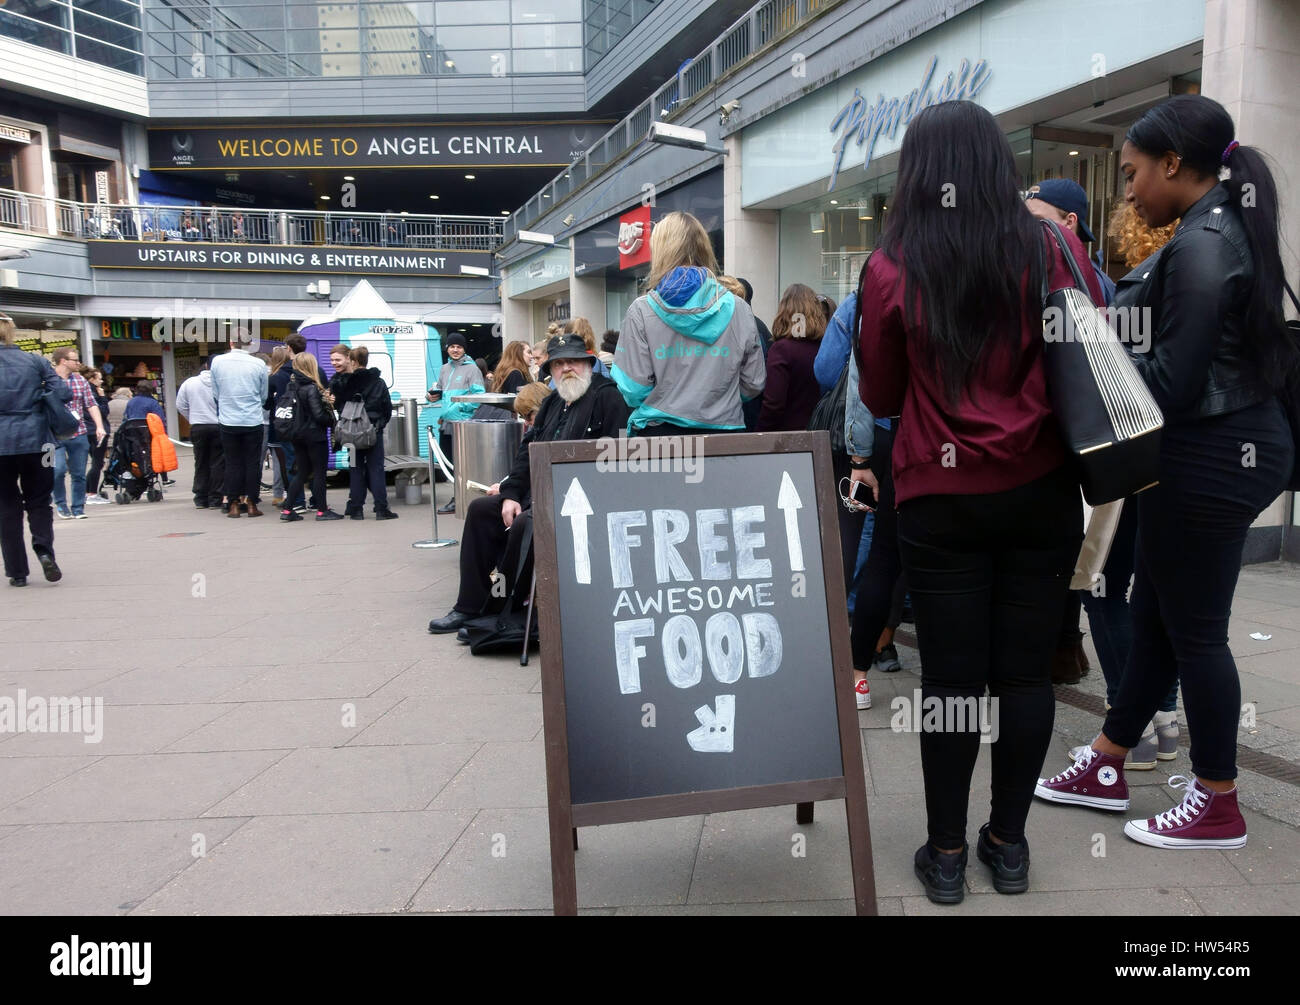 People queue for free food in Deliveroo promotion in North London shopping centre Stock Photo